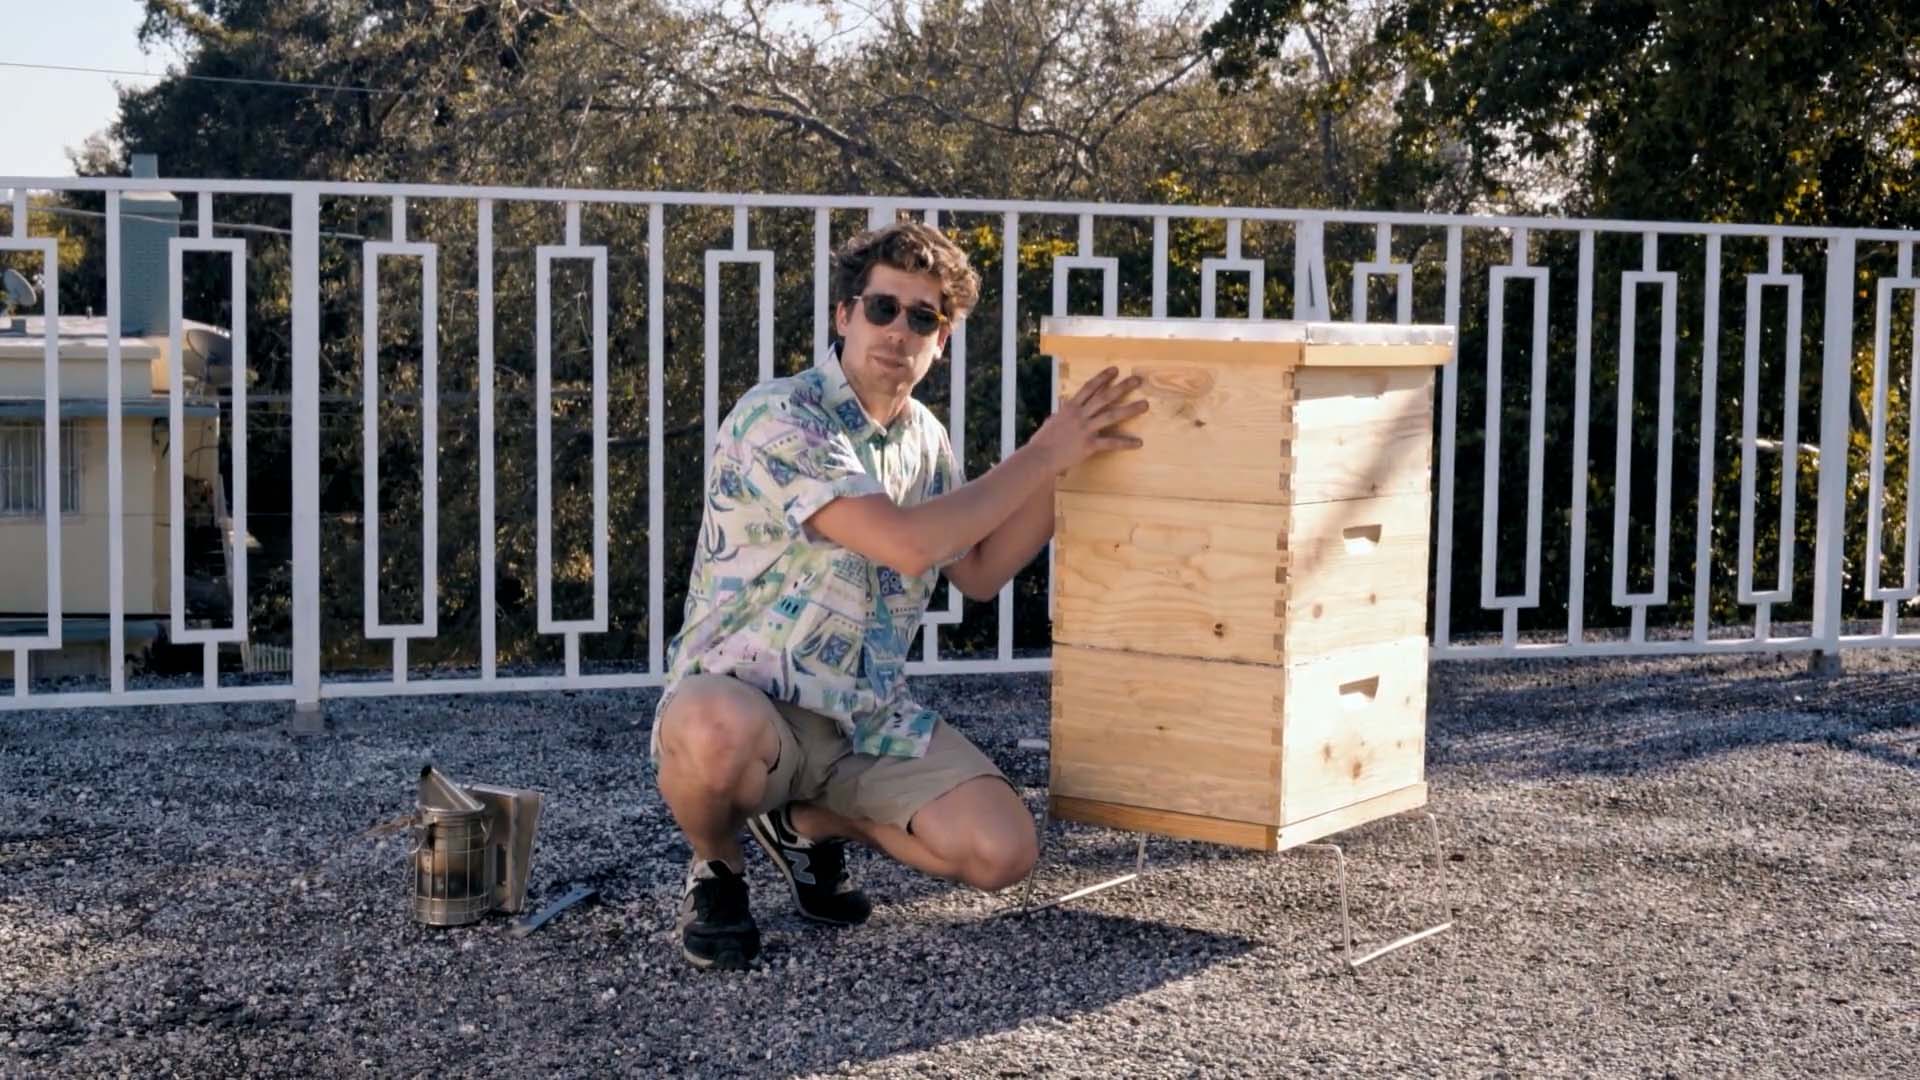 A beekeeper crouches beside a beehive, with a smoker at his side